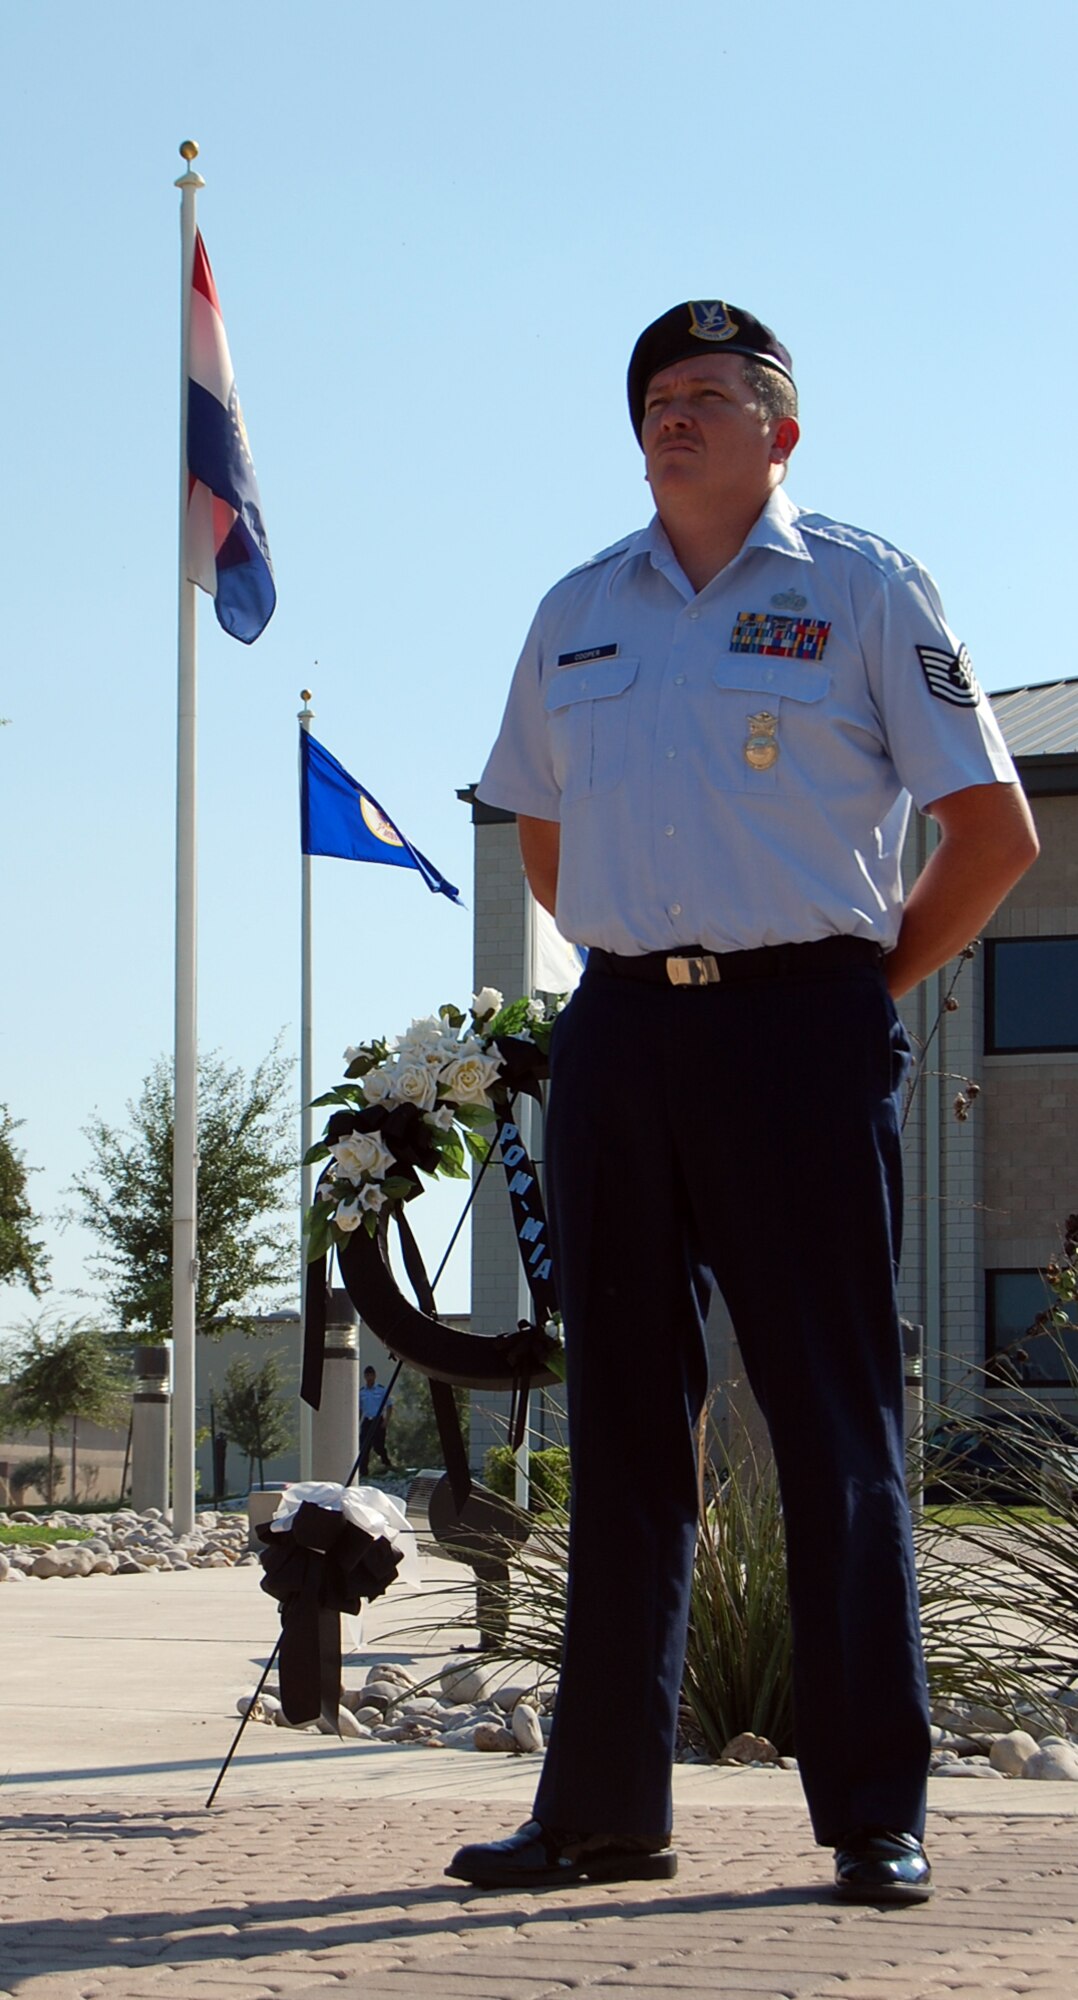 LAUGHLIN AIR FORCE BASE, Texas—Tech. Sgt. Thomas Cooper, 47th Security Forces Squadron, stands in silent vigil over a display honoring America's Prisoners of War and Missing in Action Sept. 19 at Laughlin AFB, Texas. Laughlin Airmen stood guard at the base flagpole in 30-minute shifts from 5 a.m. to 5 p.m. in observation of National POW/MIA Remembrance Day, held the third Friday in September. Sgt. Cooper had the final shift guarding the flag before it was retired during a special retreat ceremony.  (U.S. Air Force photo by 1st Lt. Courtney Kippenberger)